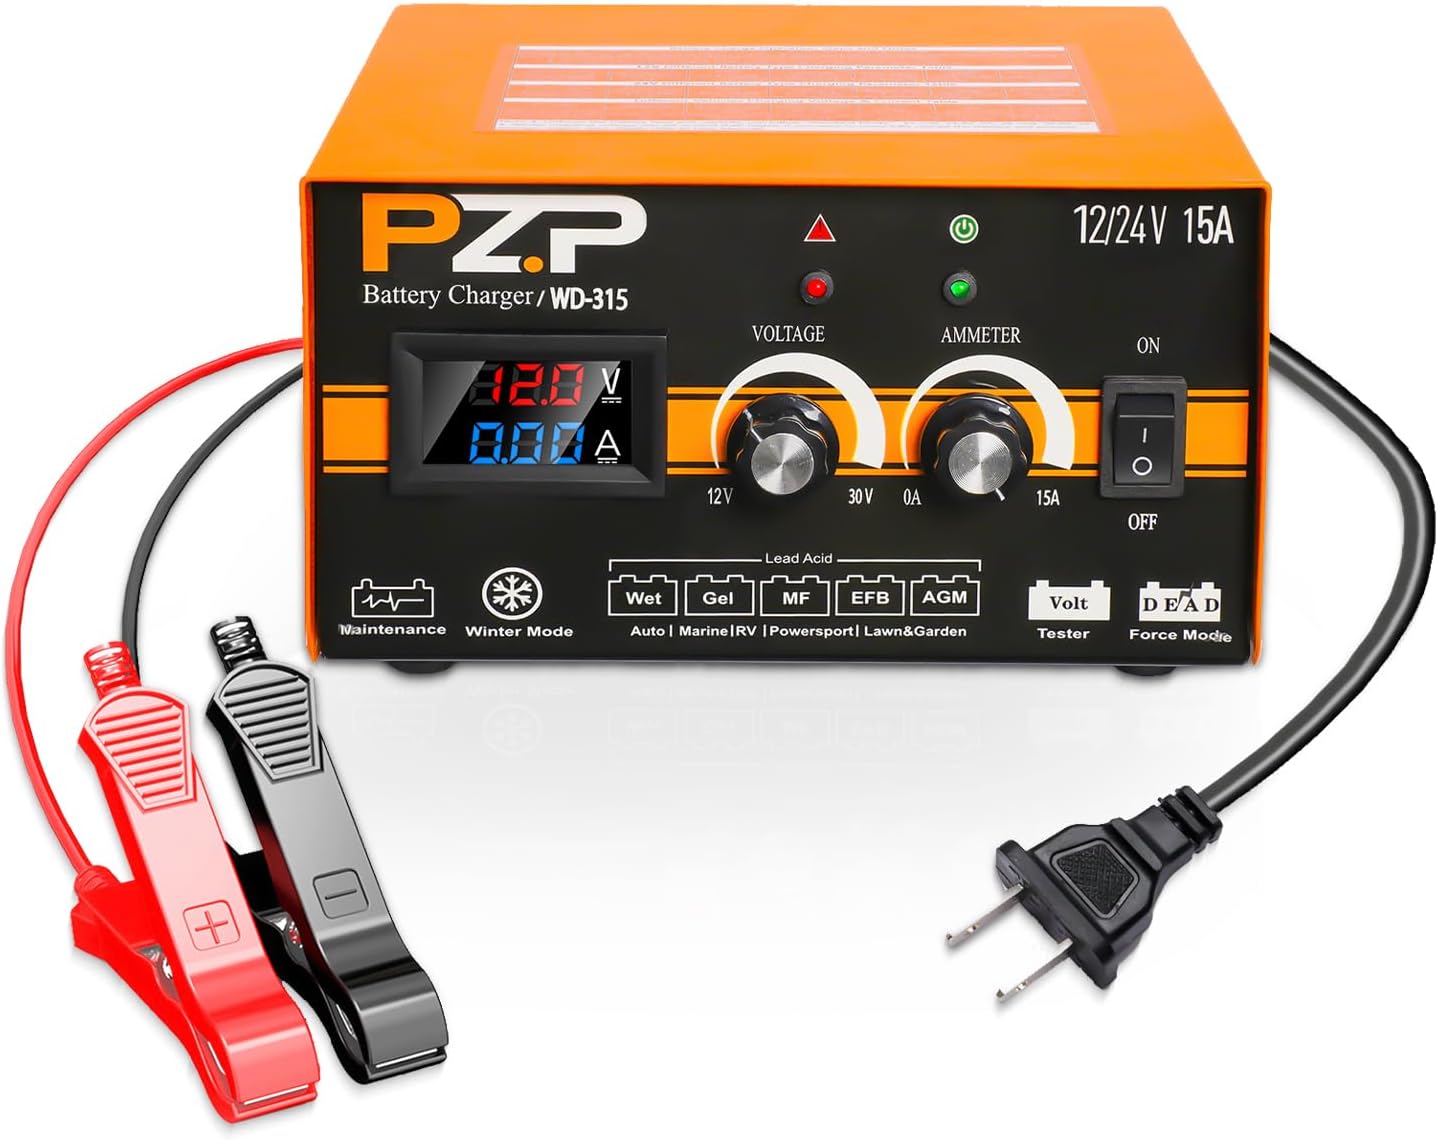 PZP 12V 24V Manual Battery Charger Automotive Smart Battery Maintainer 12 Volt Car Boat Truck Marine Deep Cycle AGM Trickle Charger 0-15A - PZP 12V 24V Battery Charger Review